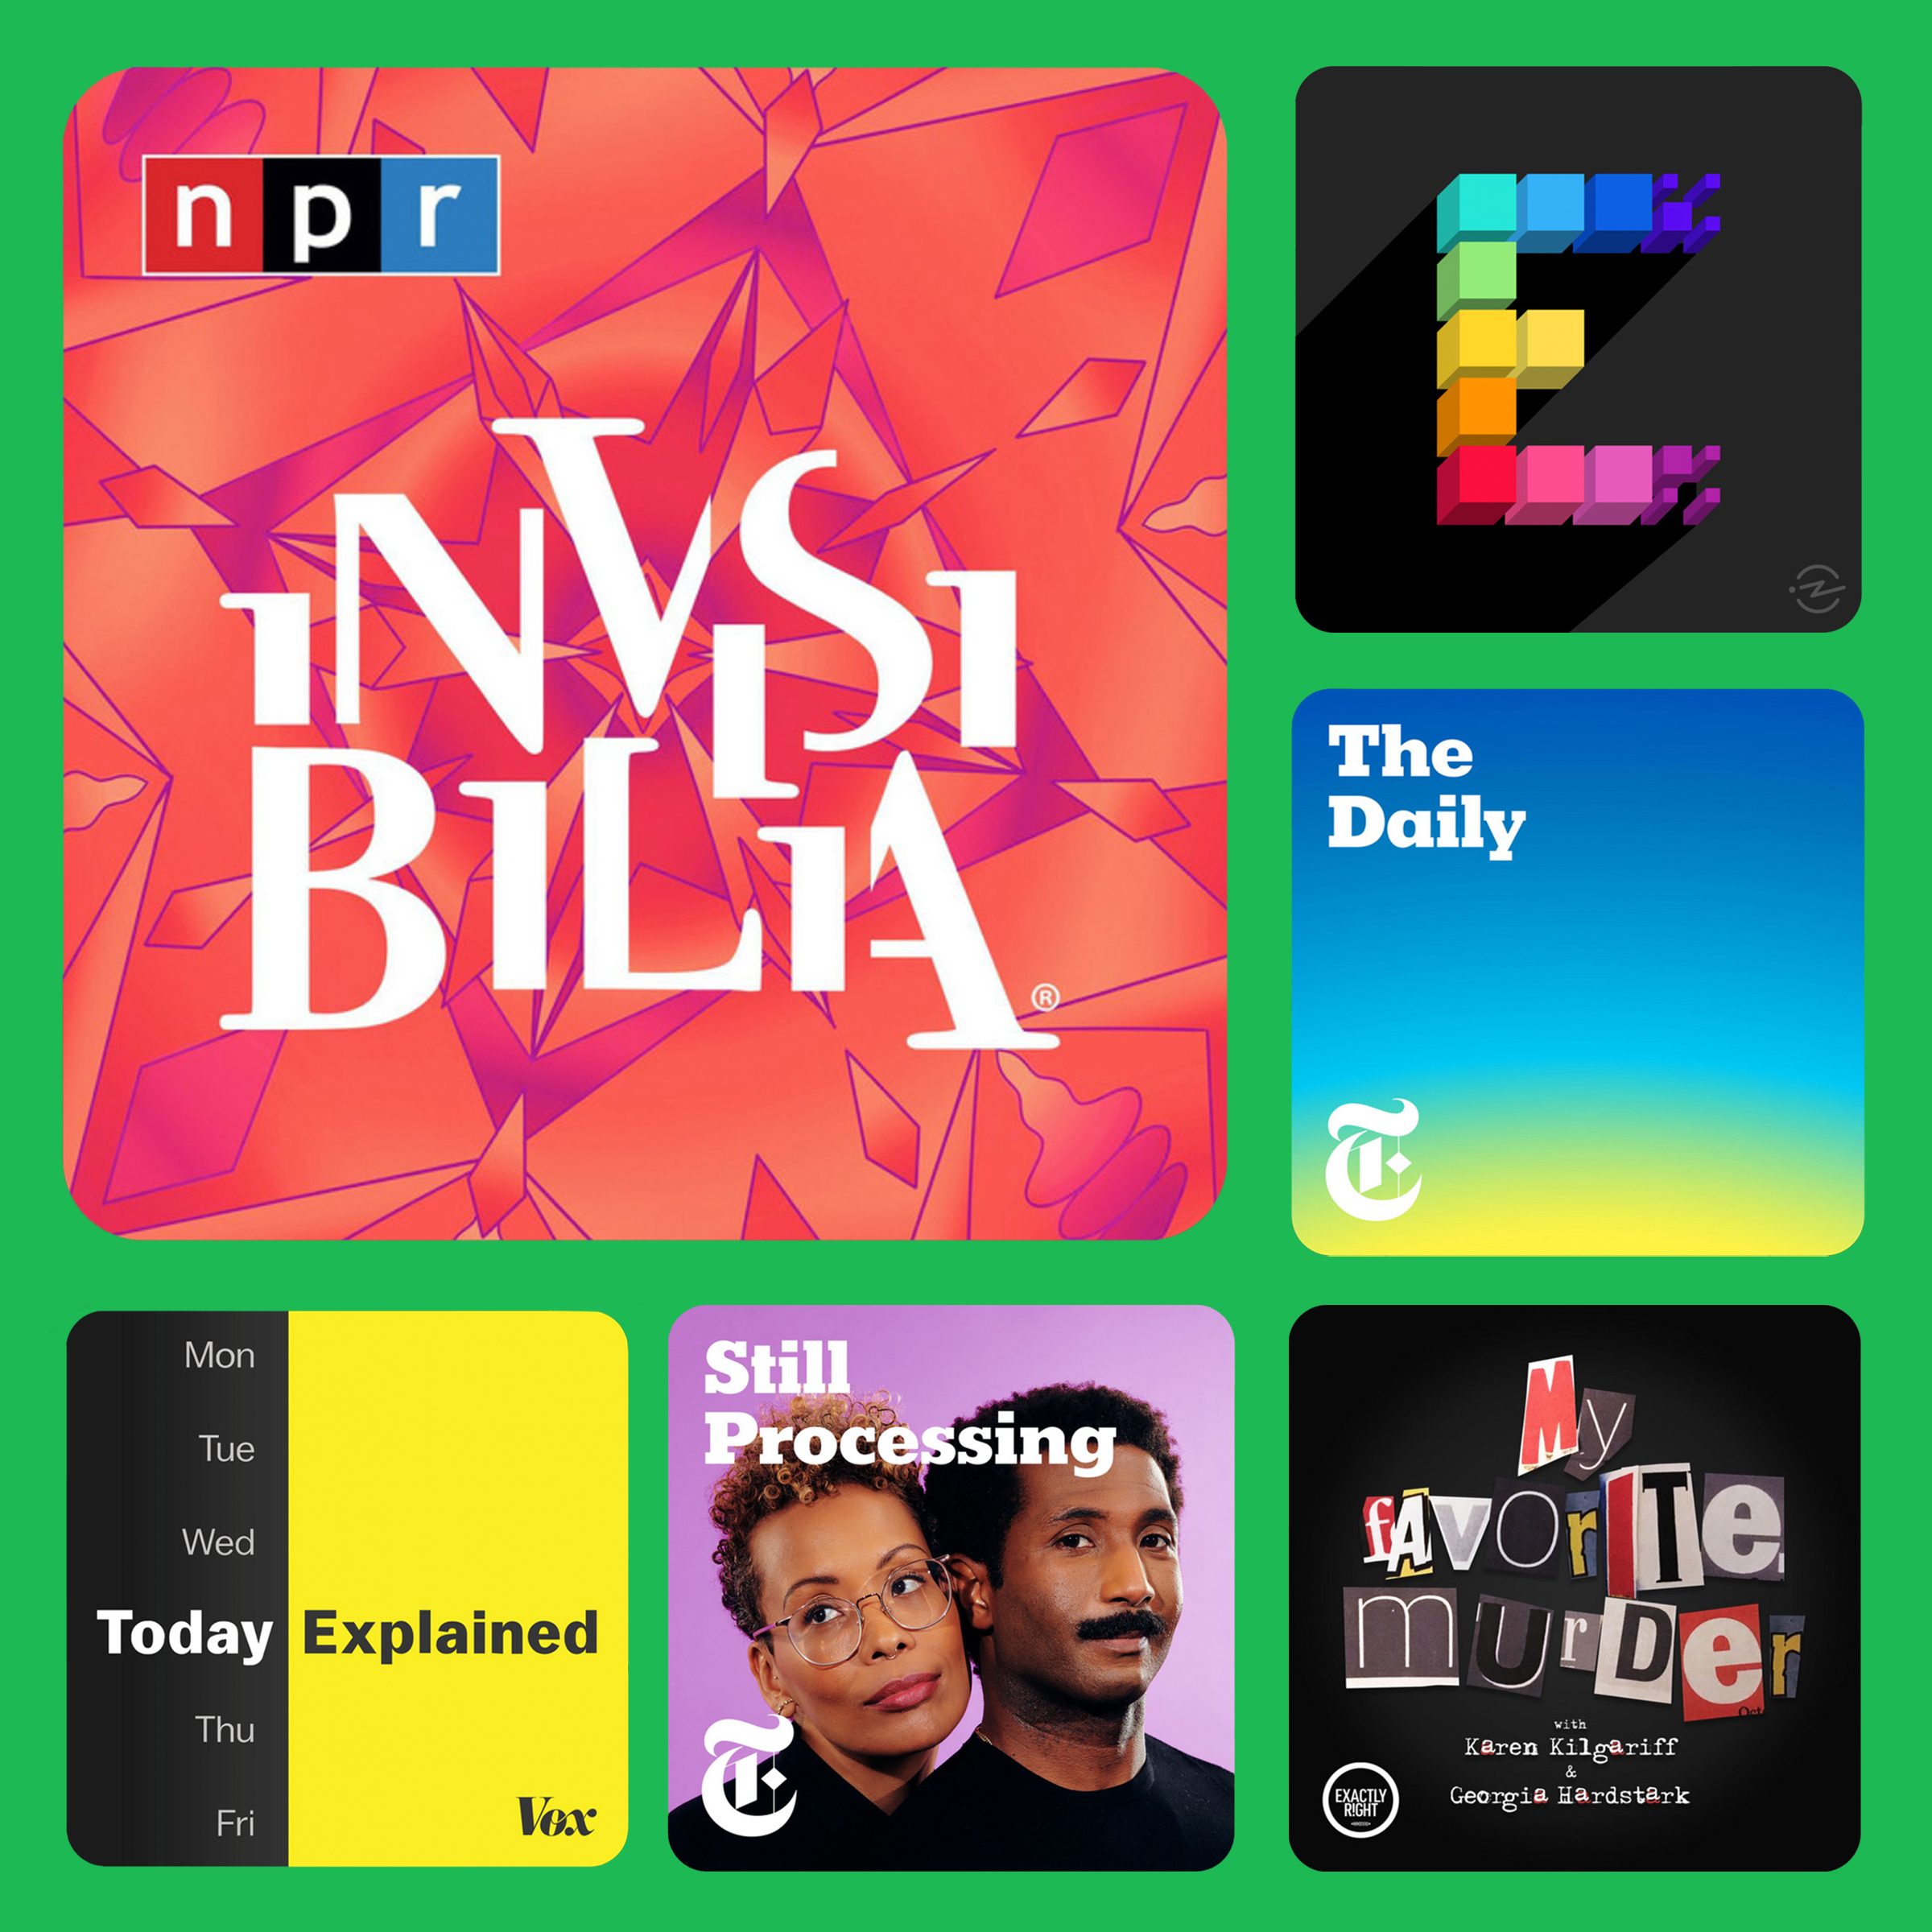 Find Your Next Listen With New Top Podcasts and Trending Podcast Charts —  Spotify